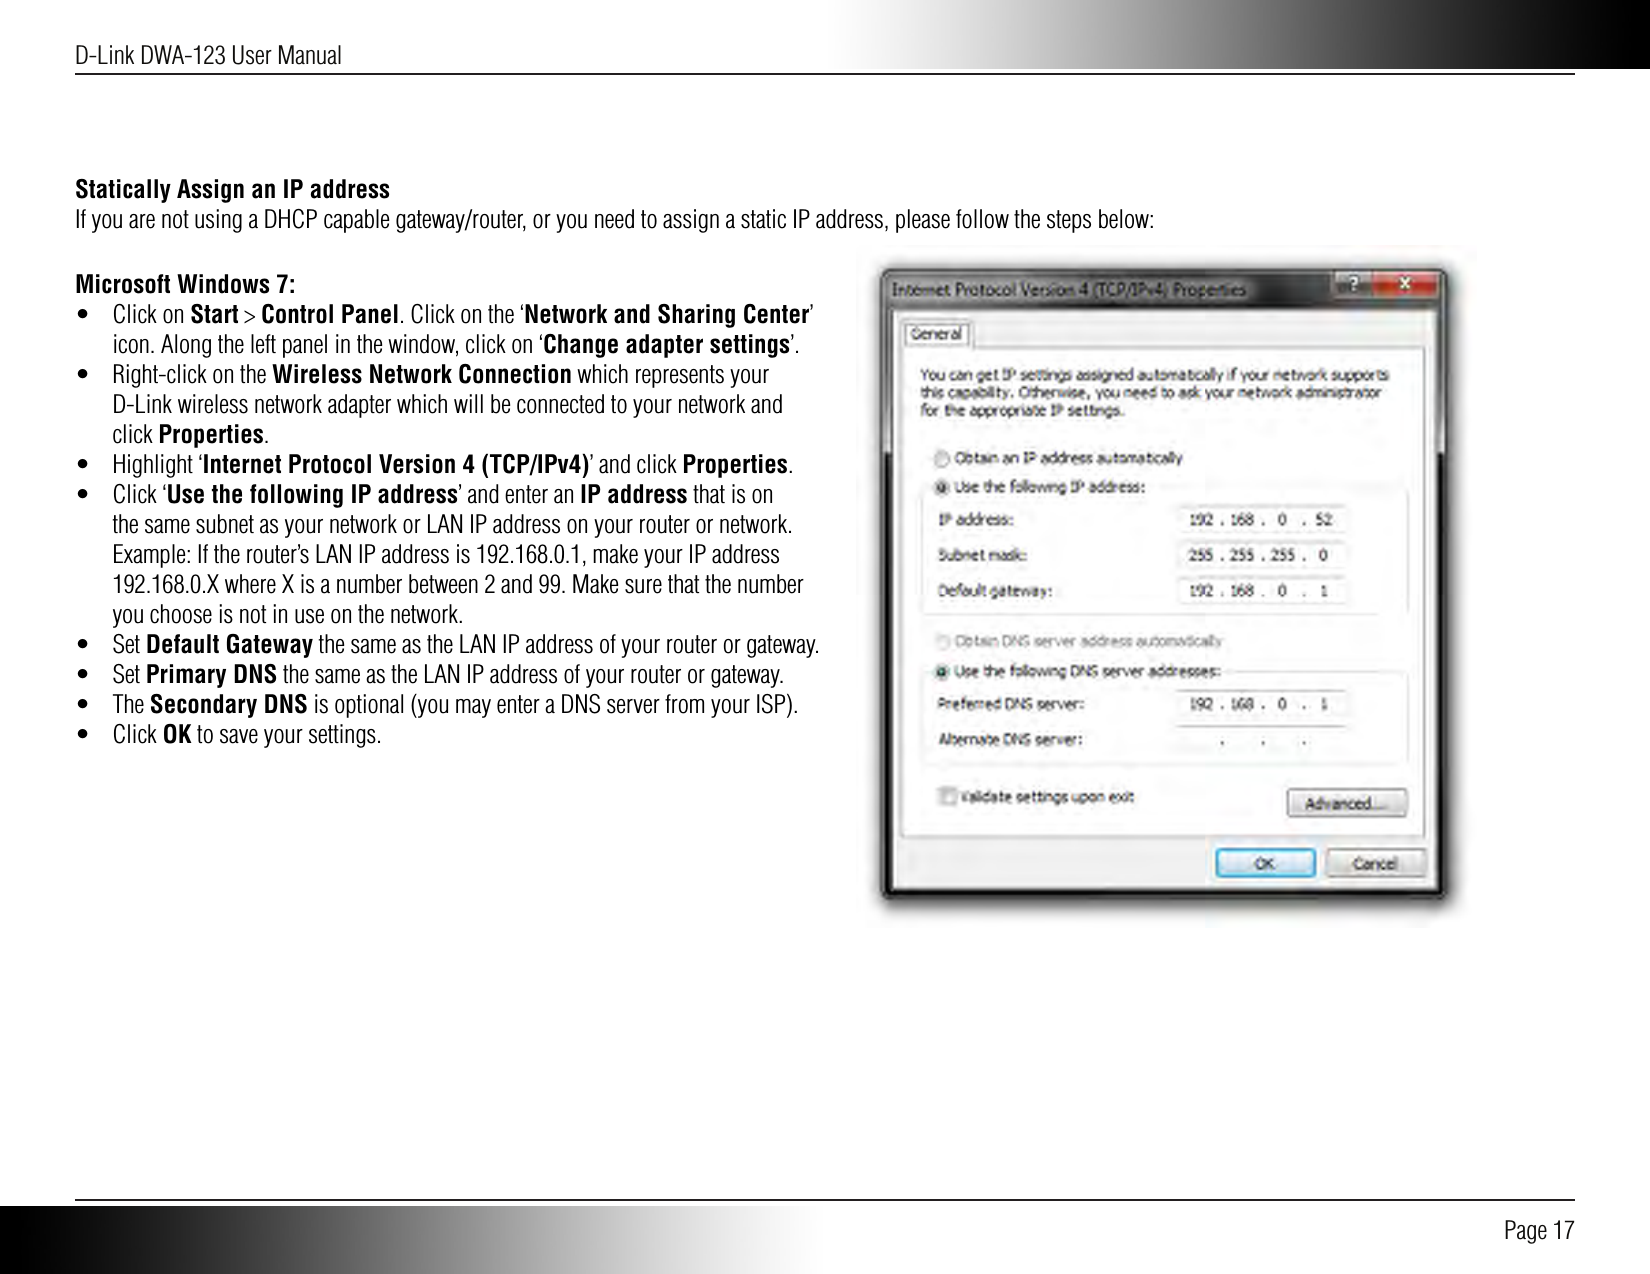 D-Link DWA-123 User Manual Page 17Statically Assign an IP addressIf you are not using a DHCP capable gateway/router, or you need to assign a static IP address, please follow the steps below:Microsoft Windows 7:•  Click on Start &gt; Control Panel. Click on the ‘Network and Sharing Center’ icon. Along the left panel in the window, click on ‘Change adapter settings’.•  Right-click on the Wireless Network Connection which represents your D-Link wireless network adapter which will be connected to your network and click Properties.•  Highlight ‘Internet Protocol Version 4 (TCP/IPv4)’ and click Properties.•  Click ‘Use the following IP address’ and enter an IP address that is on the same subnet as your network or LAN IP address on your router or network. Example: If the router’s LAN IP address is 192.168.0.1, make your IP address 192.168.0.X where X is a number between 2 and 99. Make sure that the number you choose is not in use on the network.•  Set Default Gateway the same as the LAN IP address of your router or gateway.•  Set Primary DNS the same as the LAN IP address of your router or gateway.•  The Secondary DNS is optional (you may enter a DNS server from your ISP).•  Click OK to save your settings.